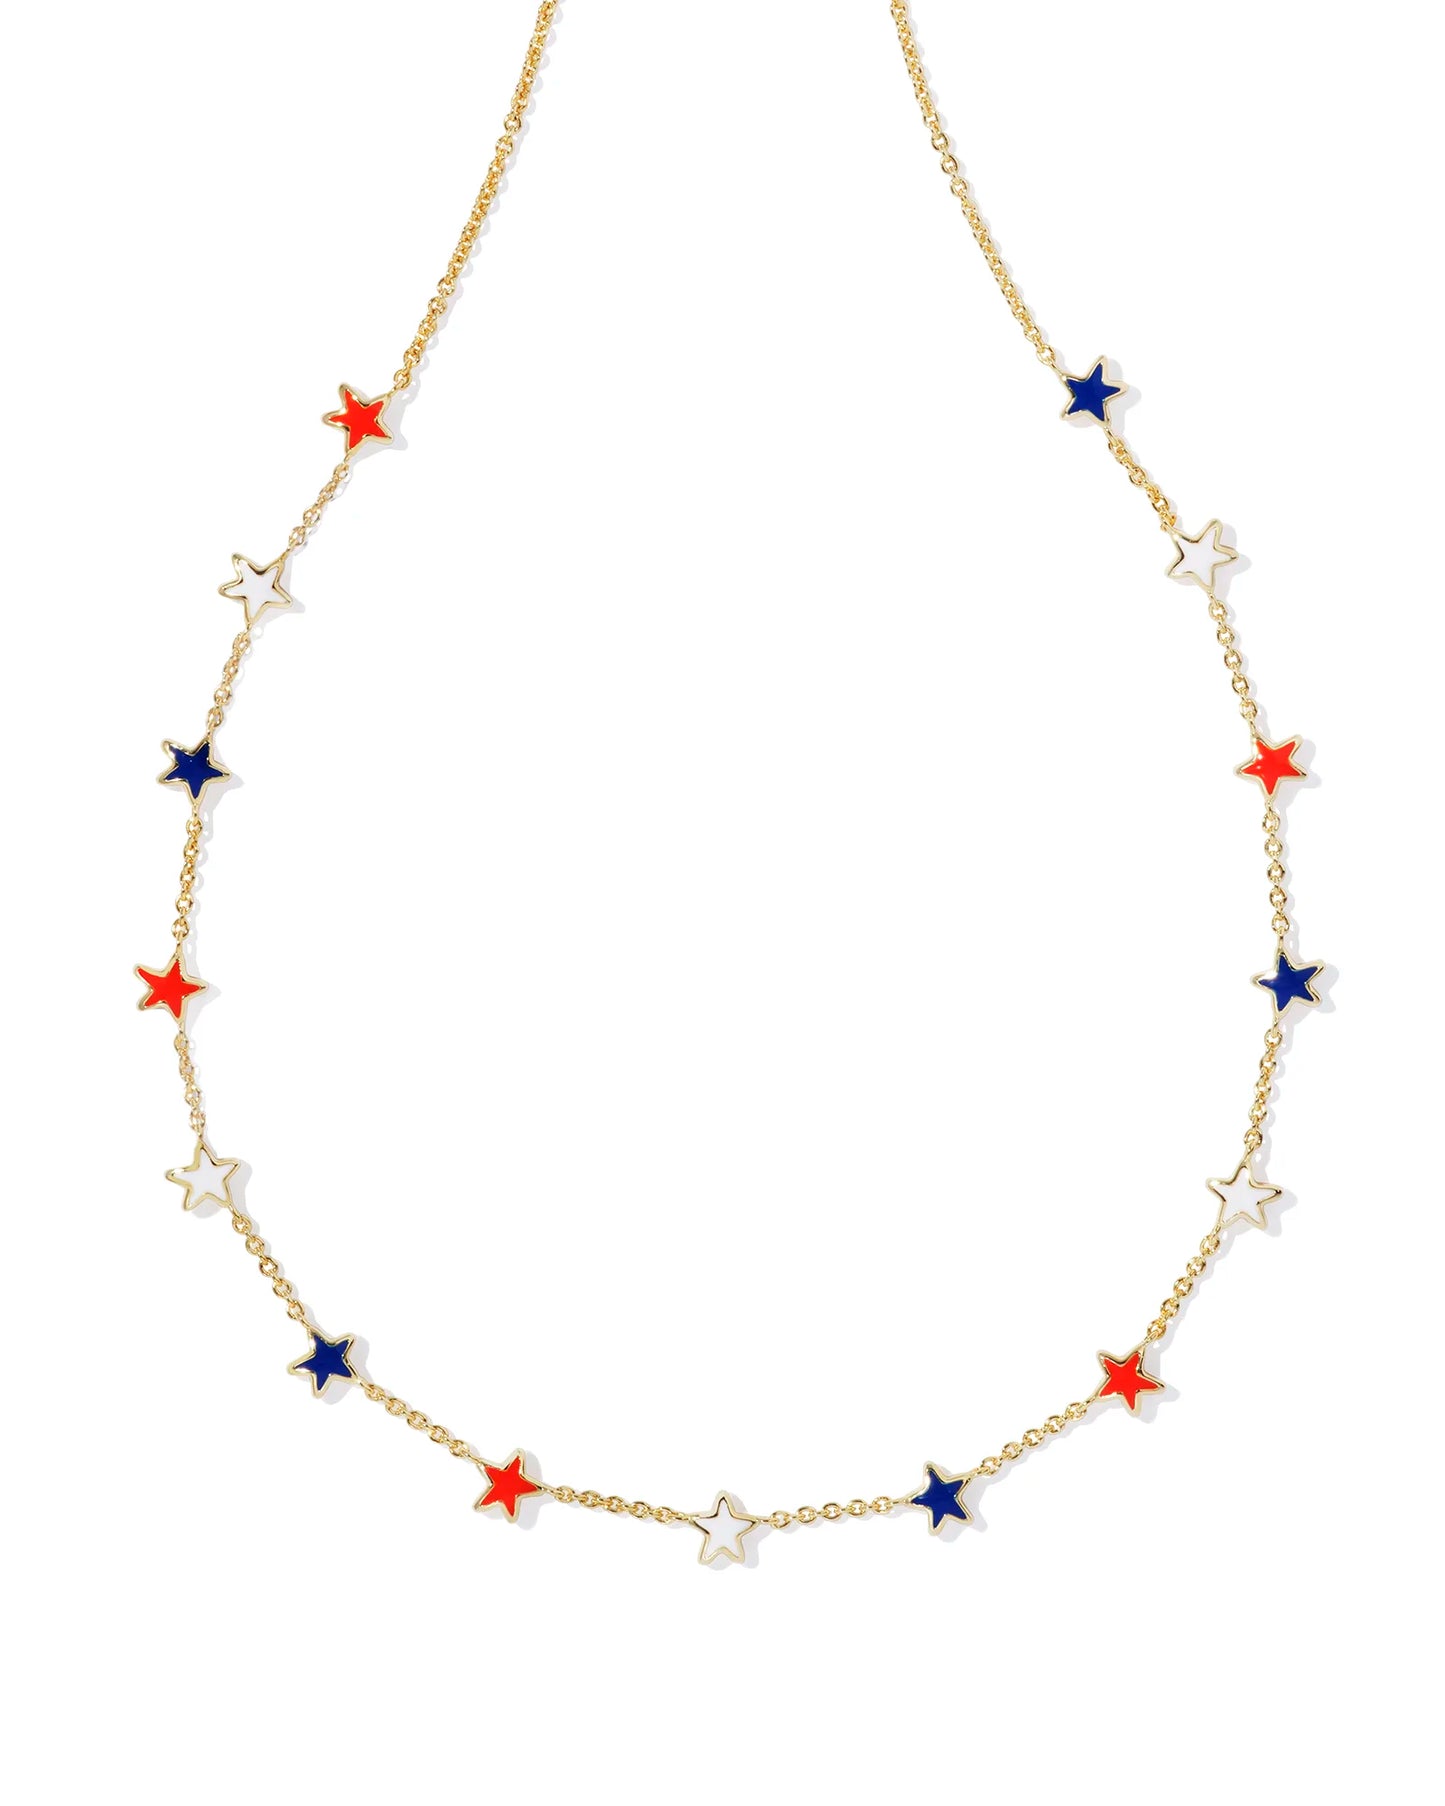 Kendra Scott Sierra Star Strand Necklace Gold Red White Blue Mix-Necklaces-Kendra Scott-FD 05/20/24, N00595GLD-The Twisted Chandelier